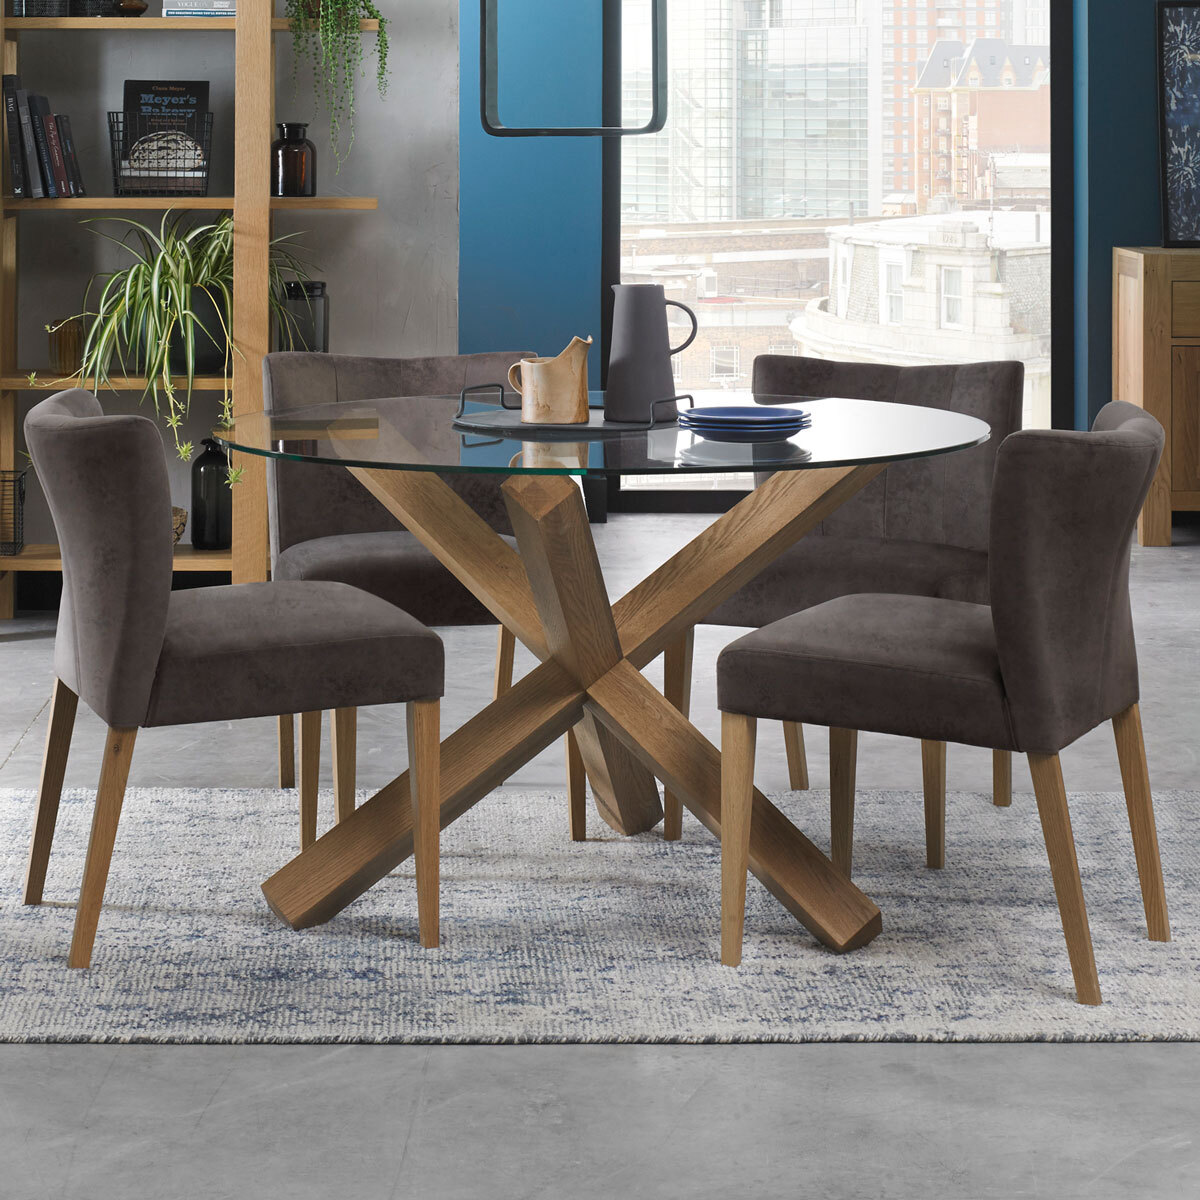 Bentley Designs Turin Glass Top Round, Round Dining Tables And Chairs Uk